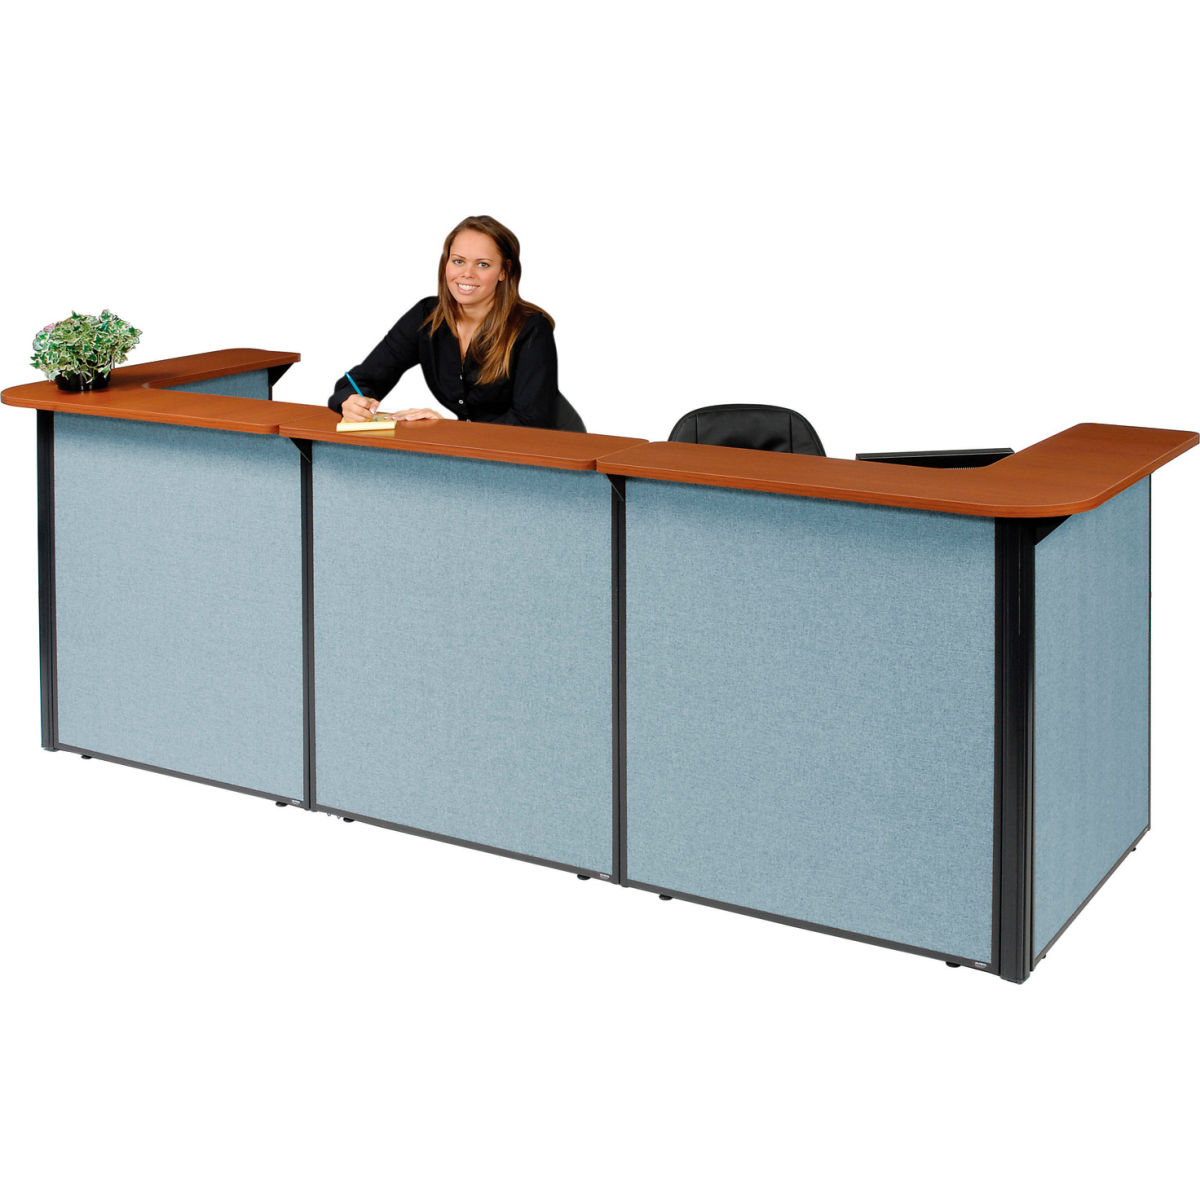 Picture of Global Industrial 3666218 Interion U-Shaped Reception Station with Cherry Counter & Blue Paneling - 124 x 44 x 44 in.